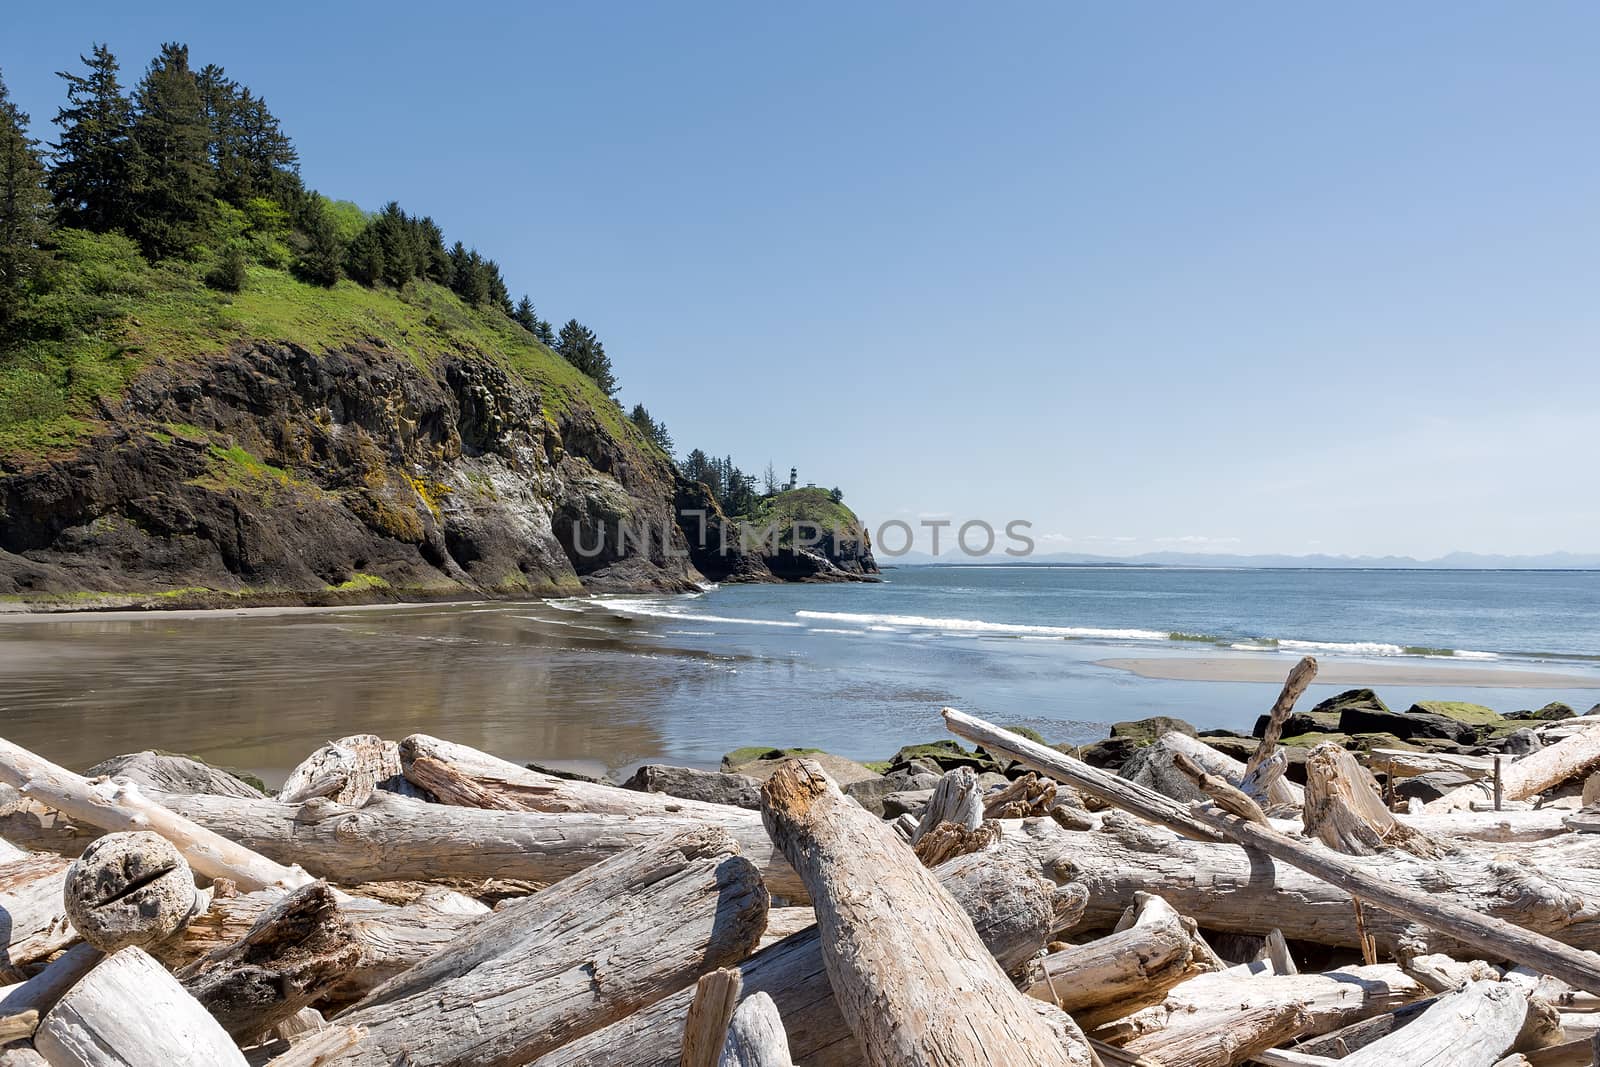 Driftwood at Waikiki Beach in Cape Disappointment State Park by jpldesigns